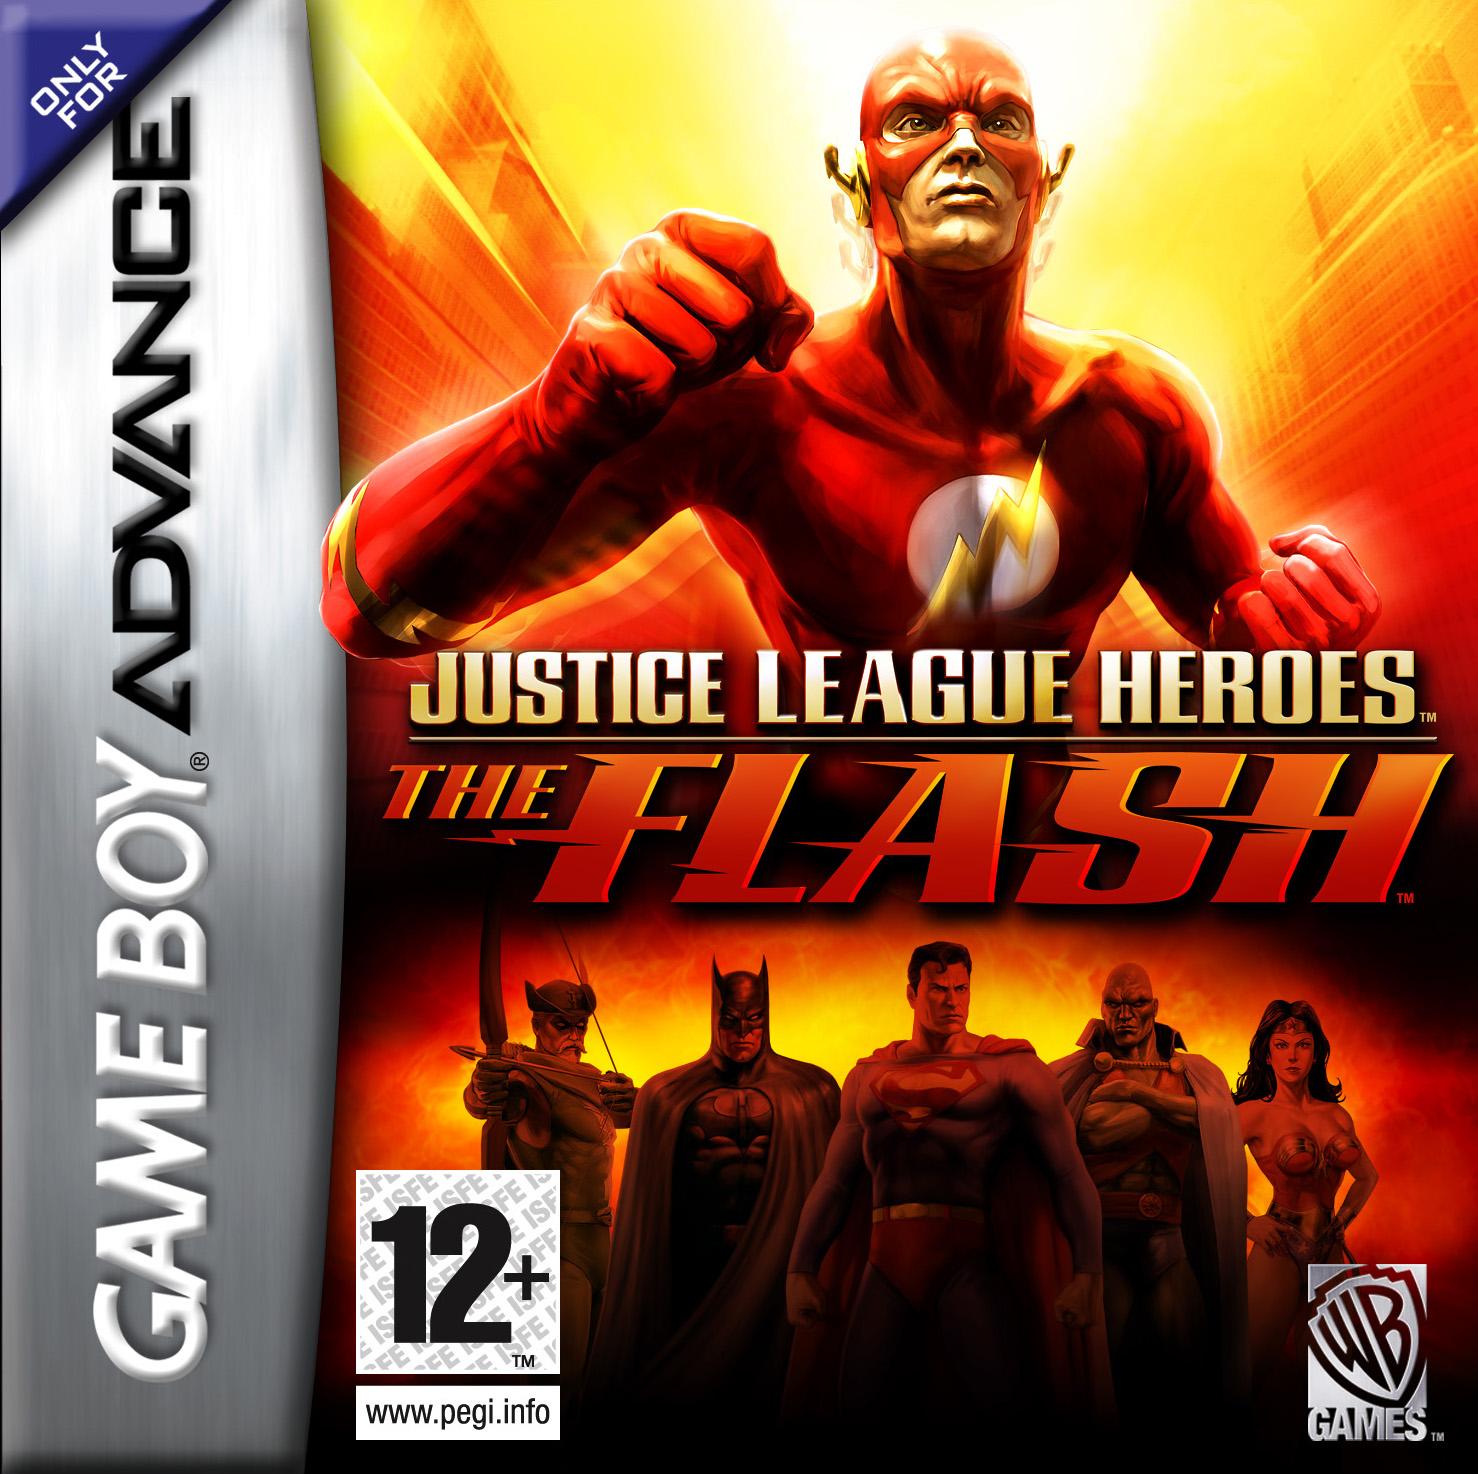 The coverart image of Justice League Heroes - The Flash